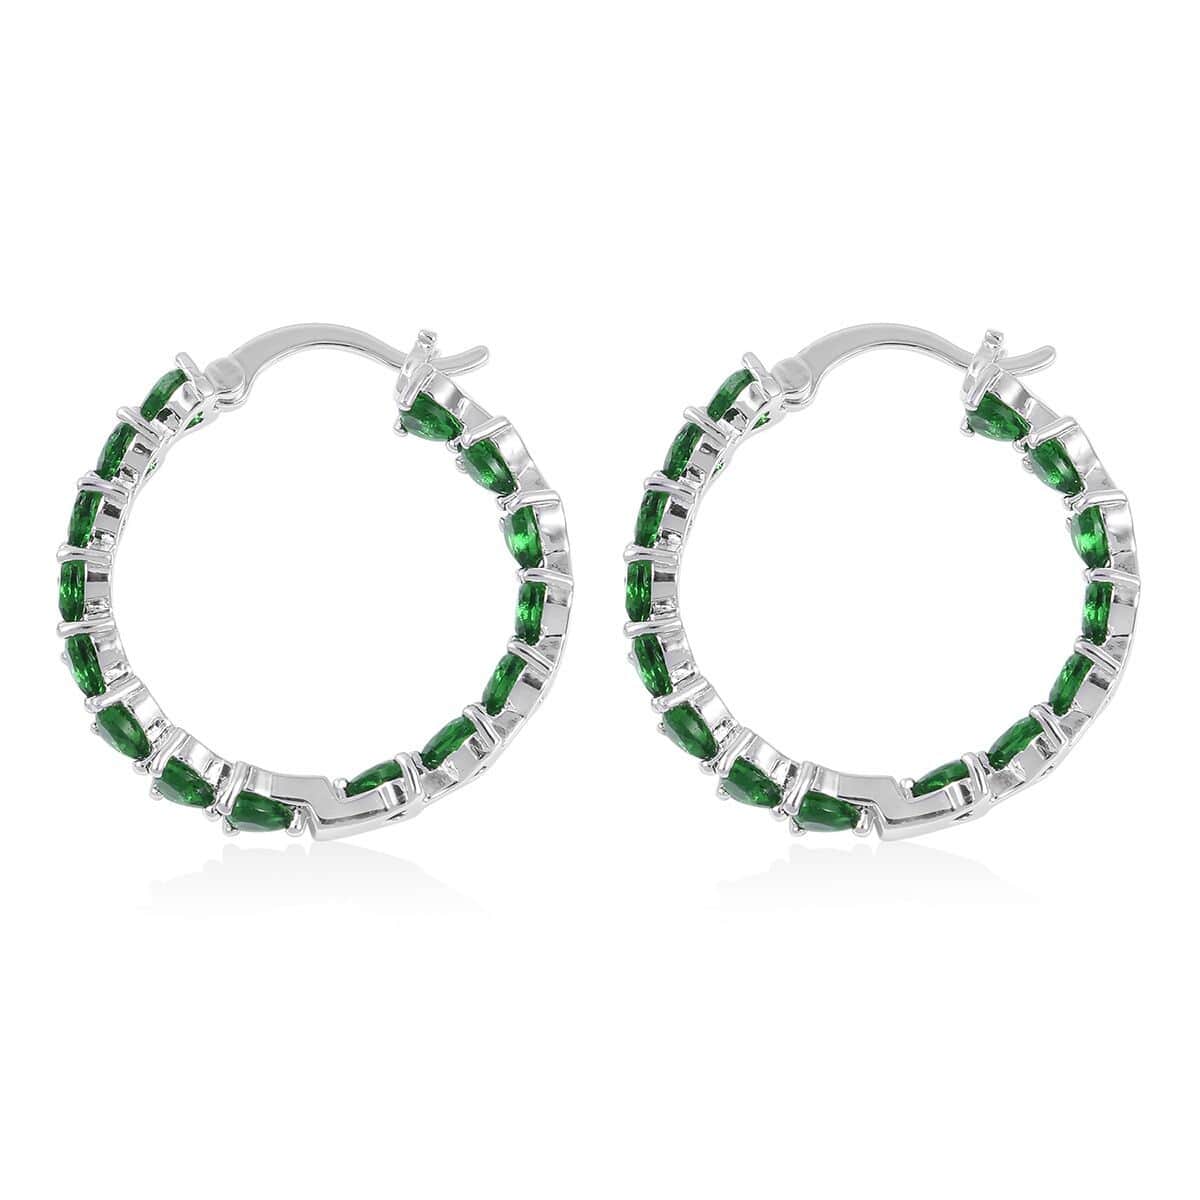 Simulated Green Diamond Earrings in Silvertone, Inside Out Hoops, Simulated Diamond Jewelry For Women image number 3